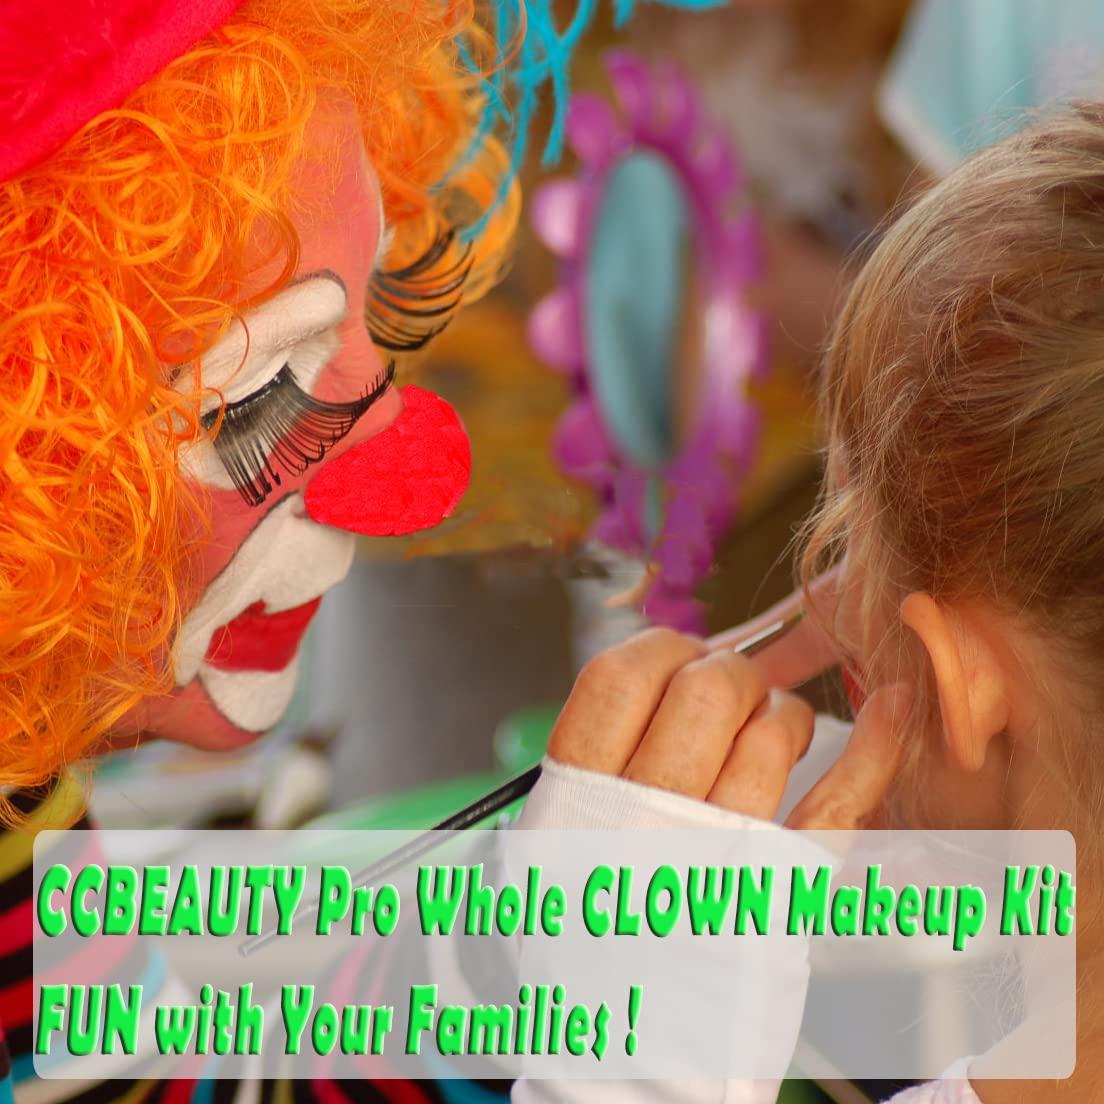  CCbeauty Clown Makeup Kit Professional White Black Red Face  Paint Foundation Cream, 6 Brushes,Red Nose for Halloween Special Effects  SFX Joker Skeleton Vampire Zombie Cosplay Dress Up Makeup : Arts, Crafts